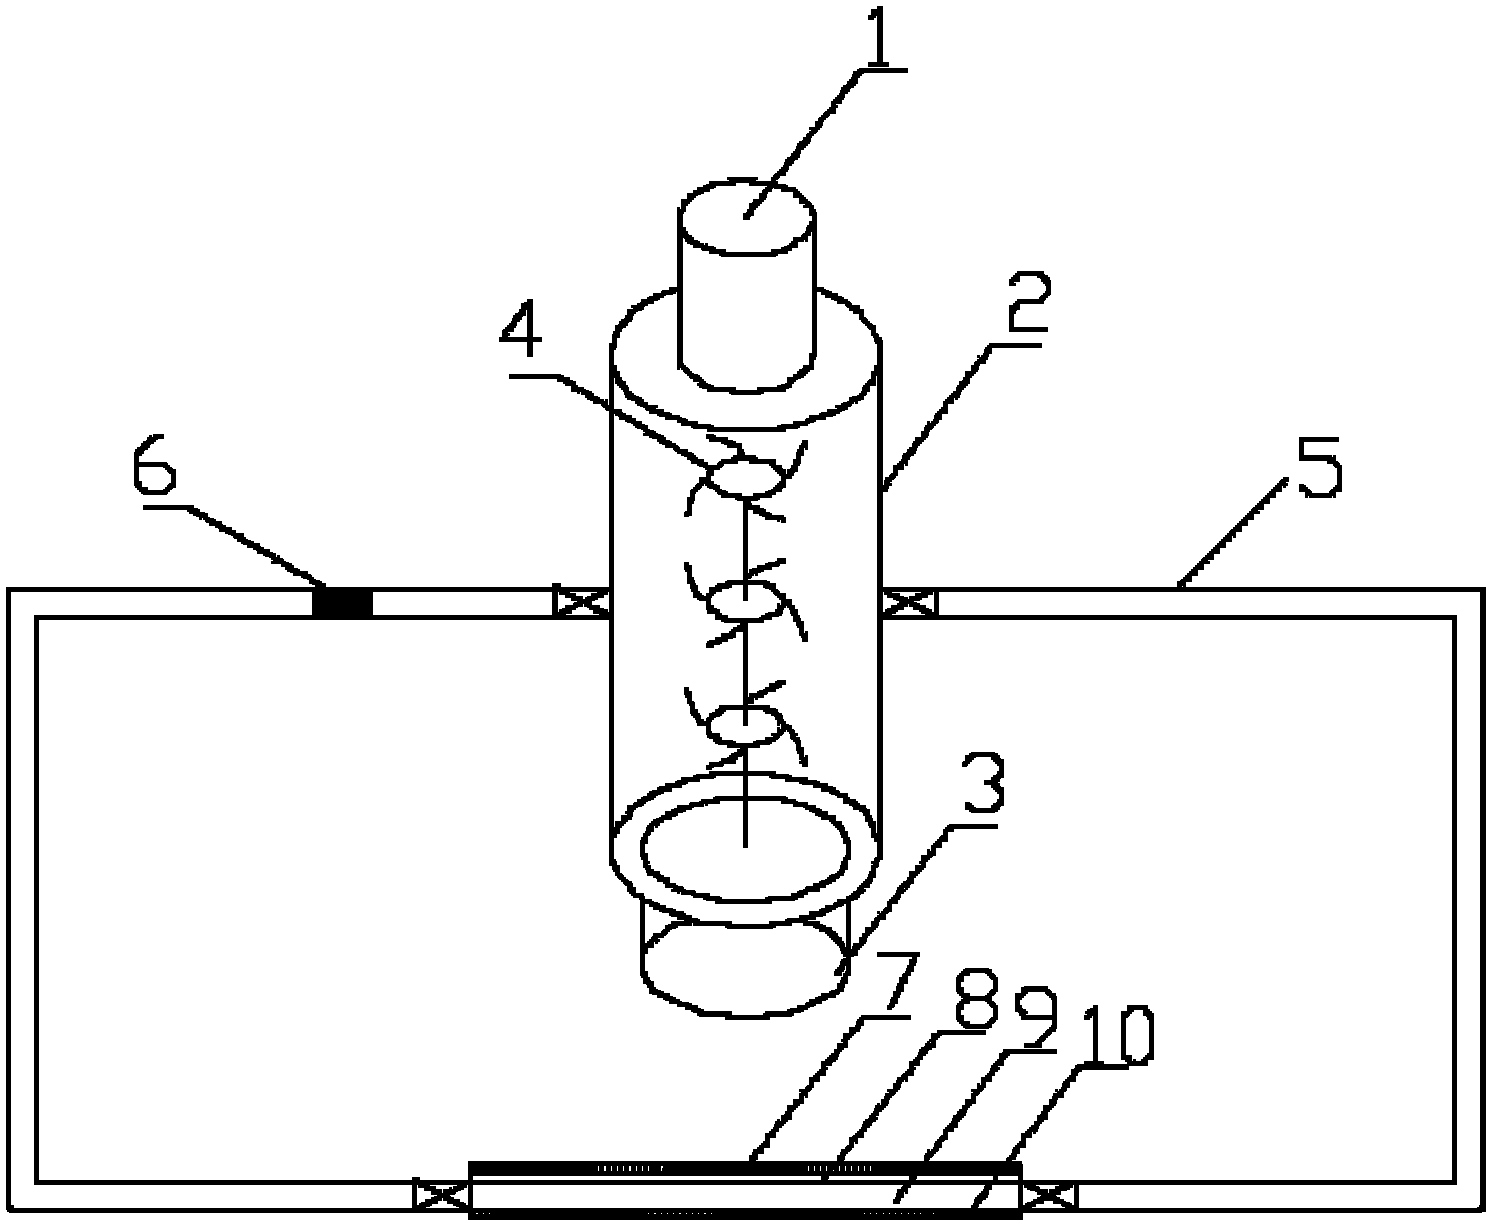 Device and method for quickly dispersing sand grains